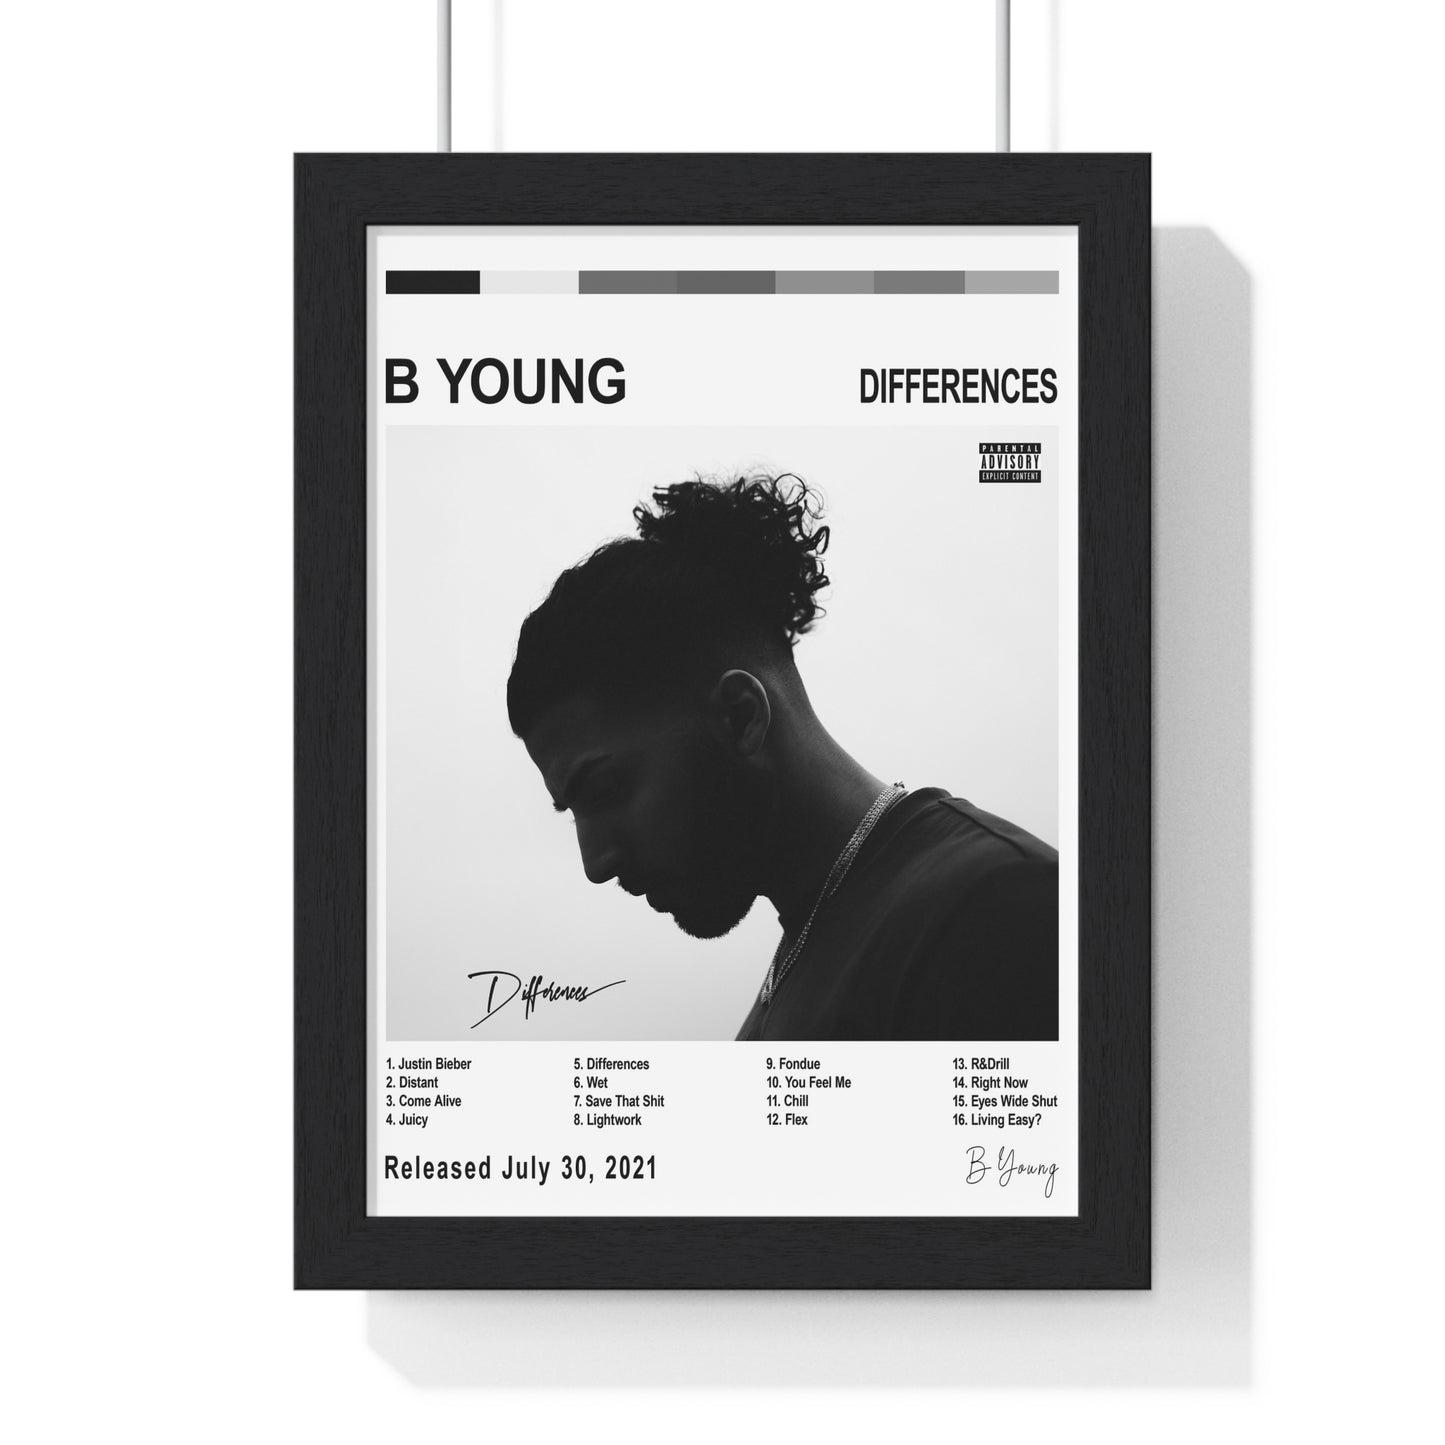 B Young - Differences Album Poster